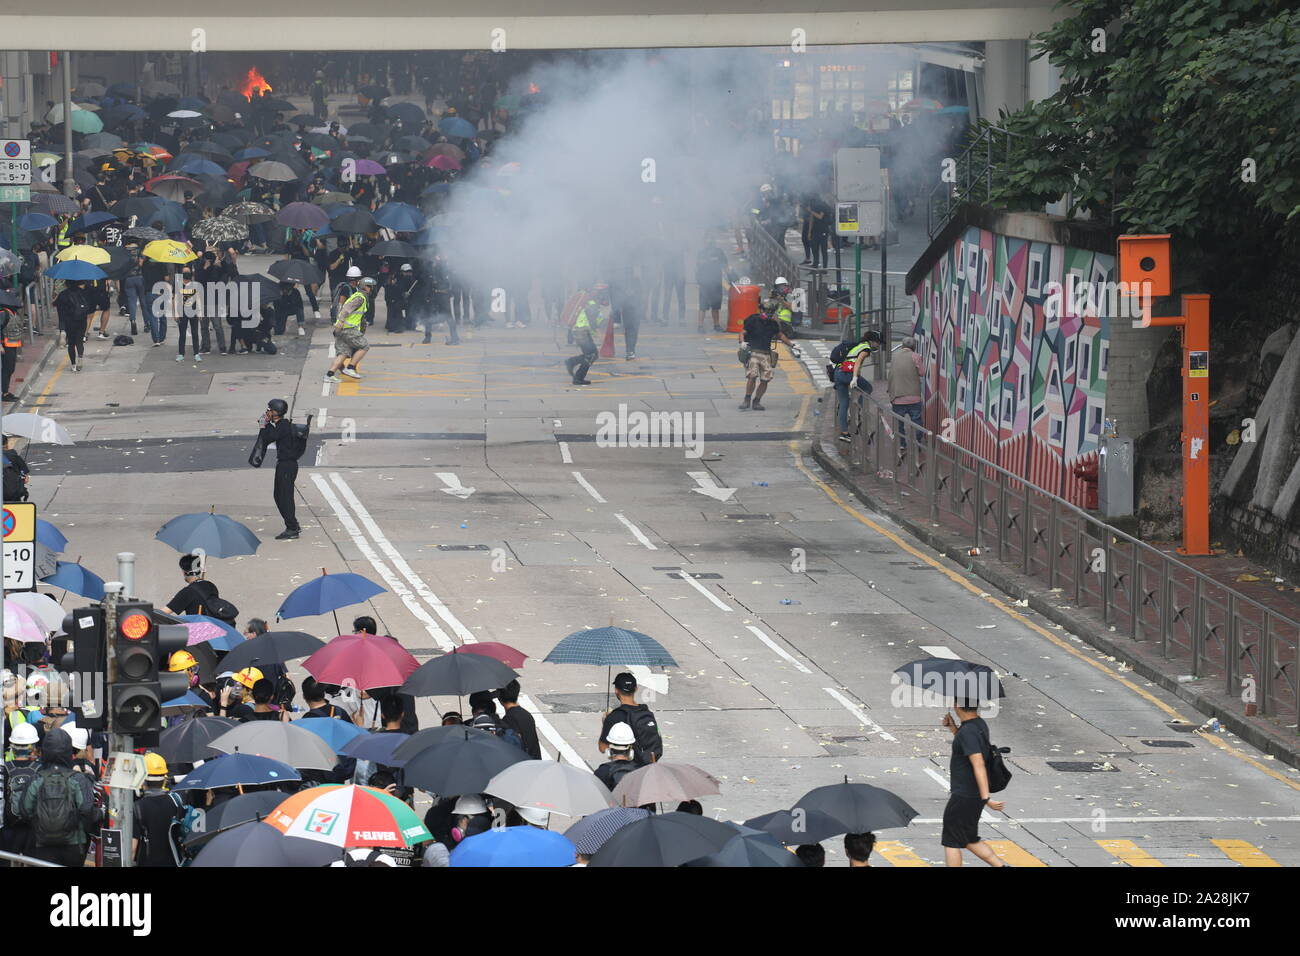 Hong Kong, China. 01st Oct, 2019. People in Hong Kong choosing not to celebrate China's National Day holiday, but instead 'no national celebration, only national mourning' . With events happening throughout Hong Kong. Credit: David Coulson/Alamy Live News Stock Photo